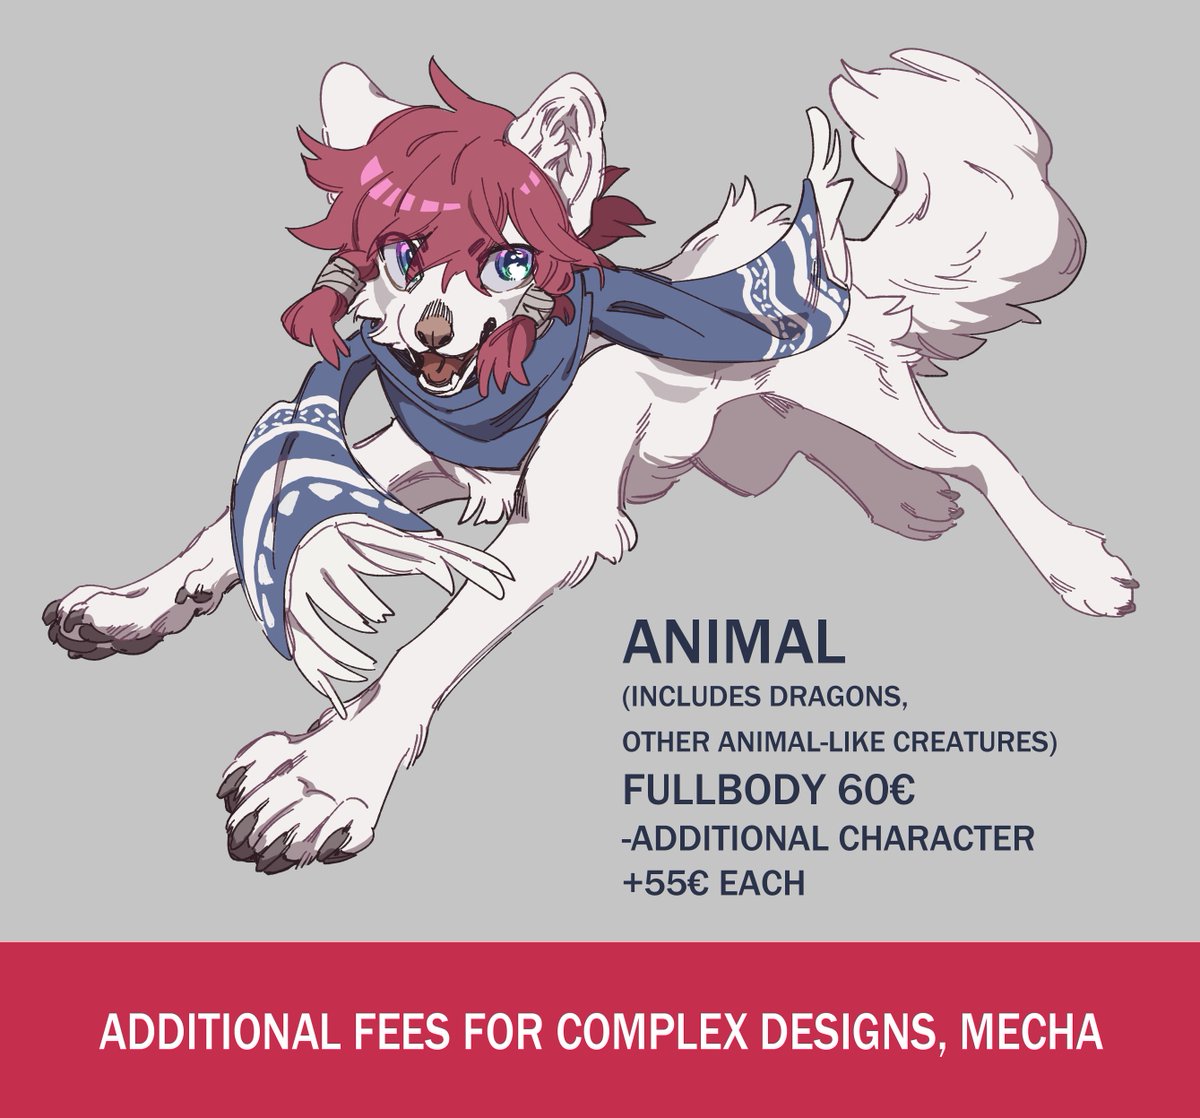 ❗️COMMISSIONS OPEN❗️
Only doing animal commissions this time 